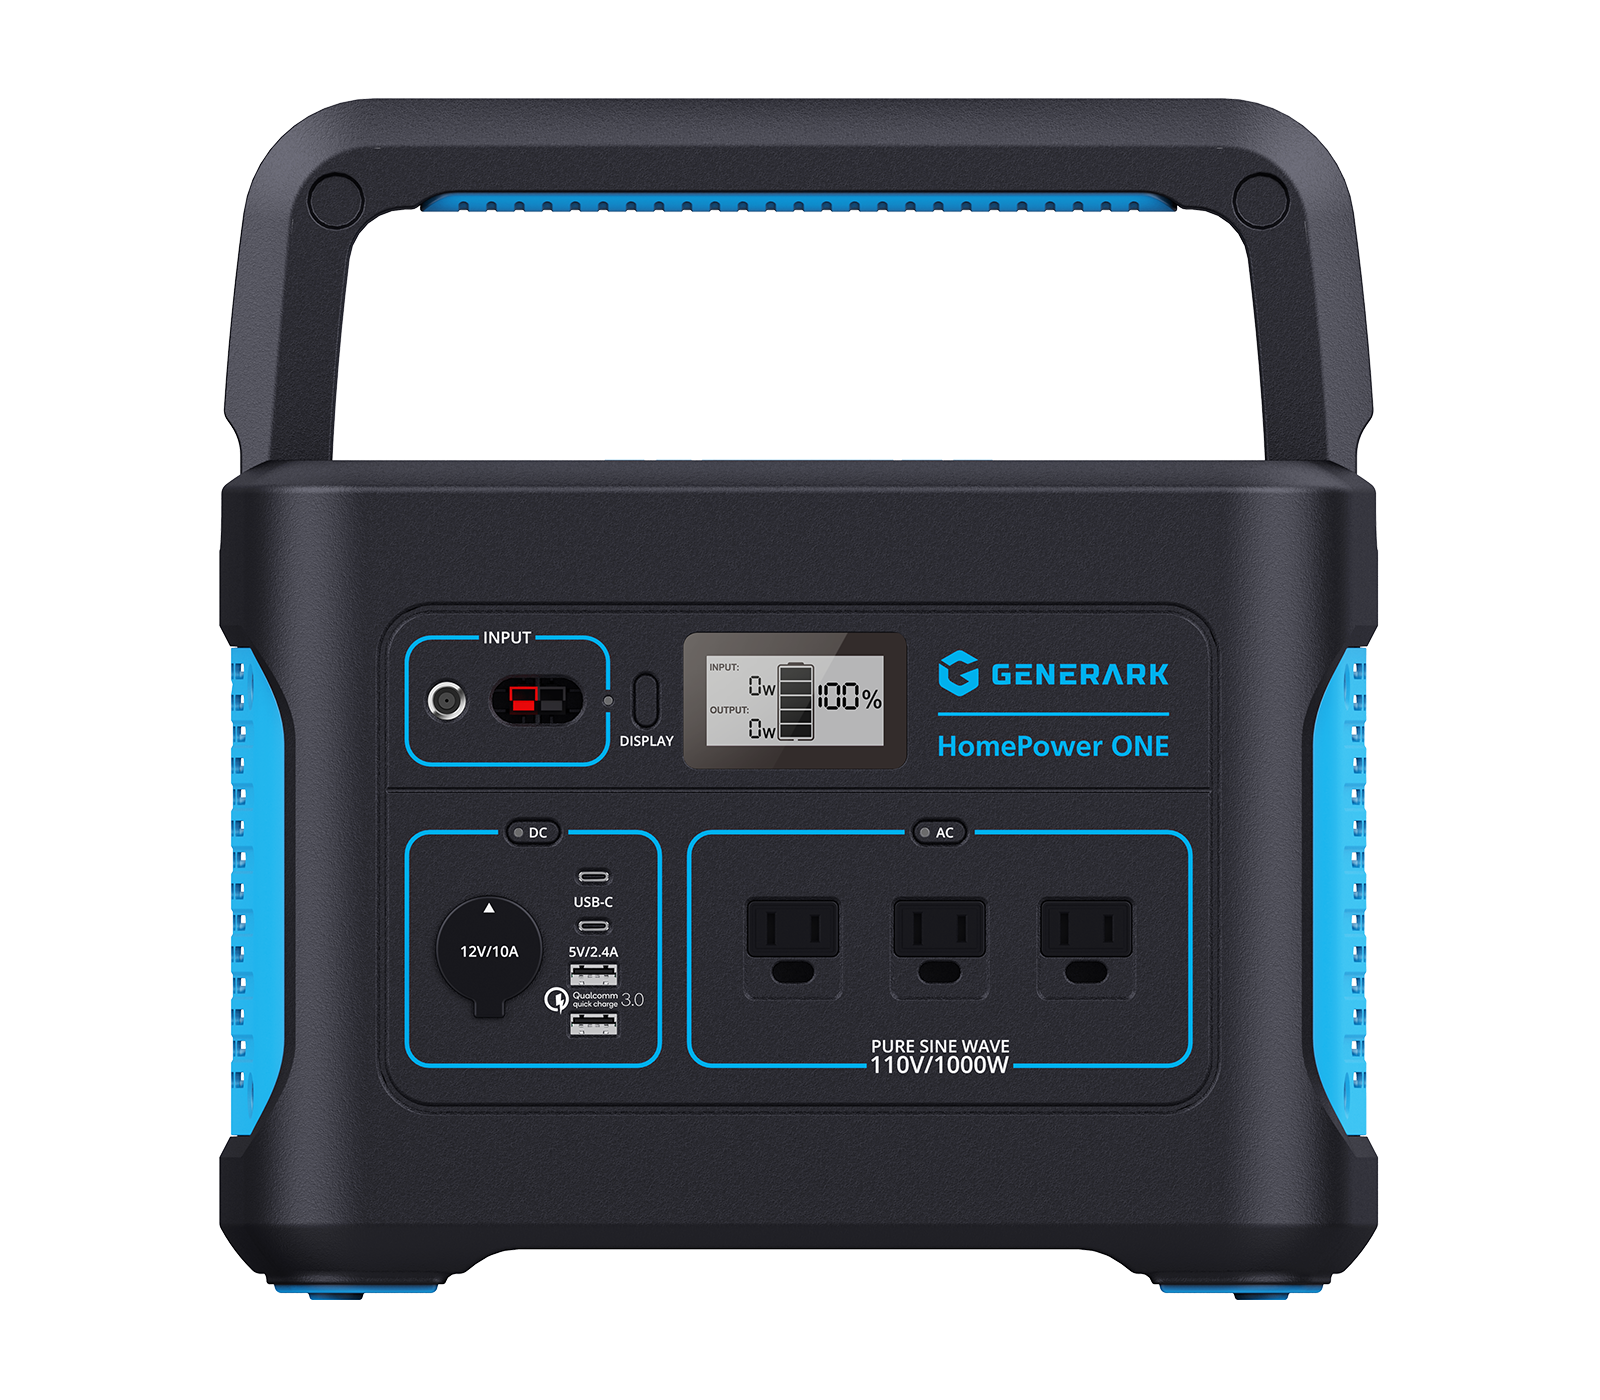 Generark Launches The Most Reliable and Versatile Emergency Power Supply Solution For the Home